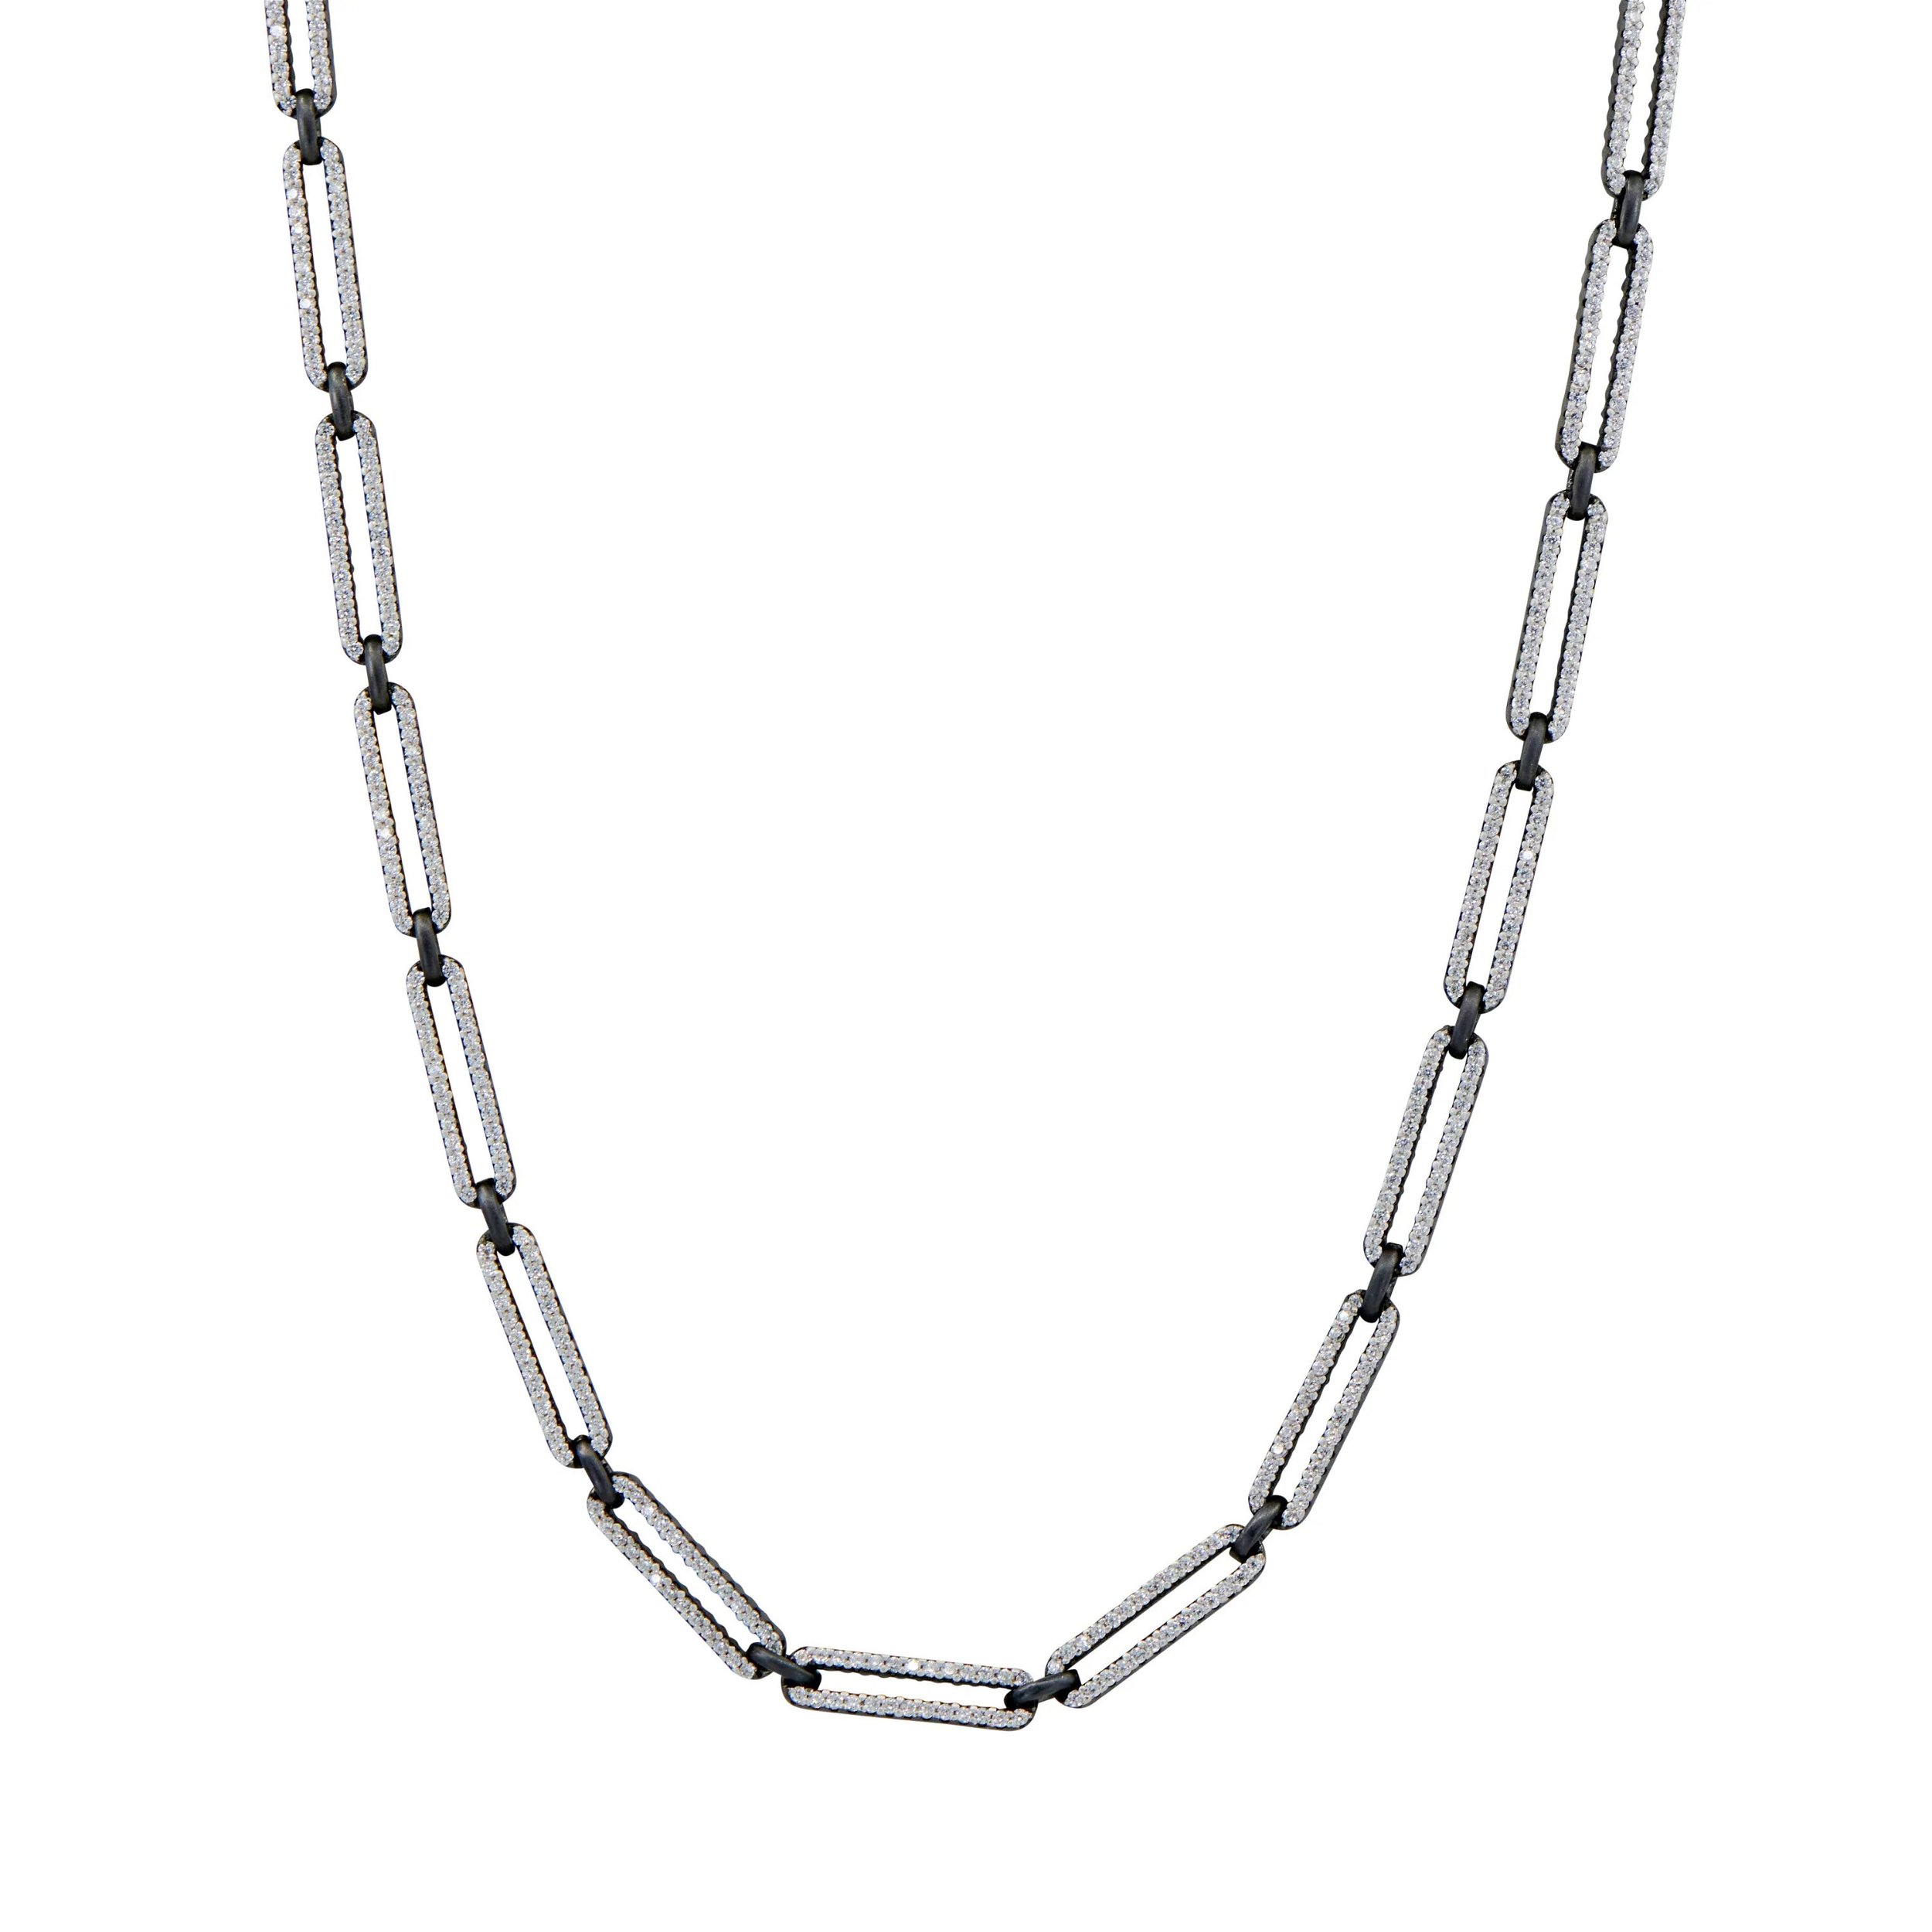 Streets of Brooklyn Chain Link Necklace